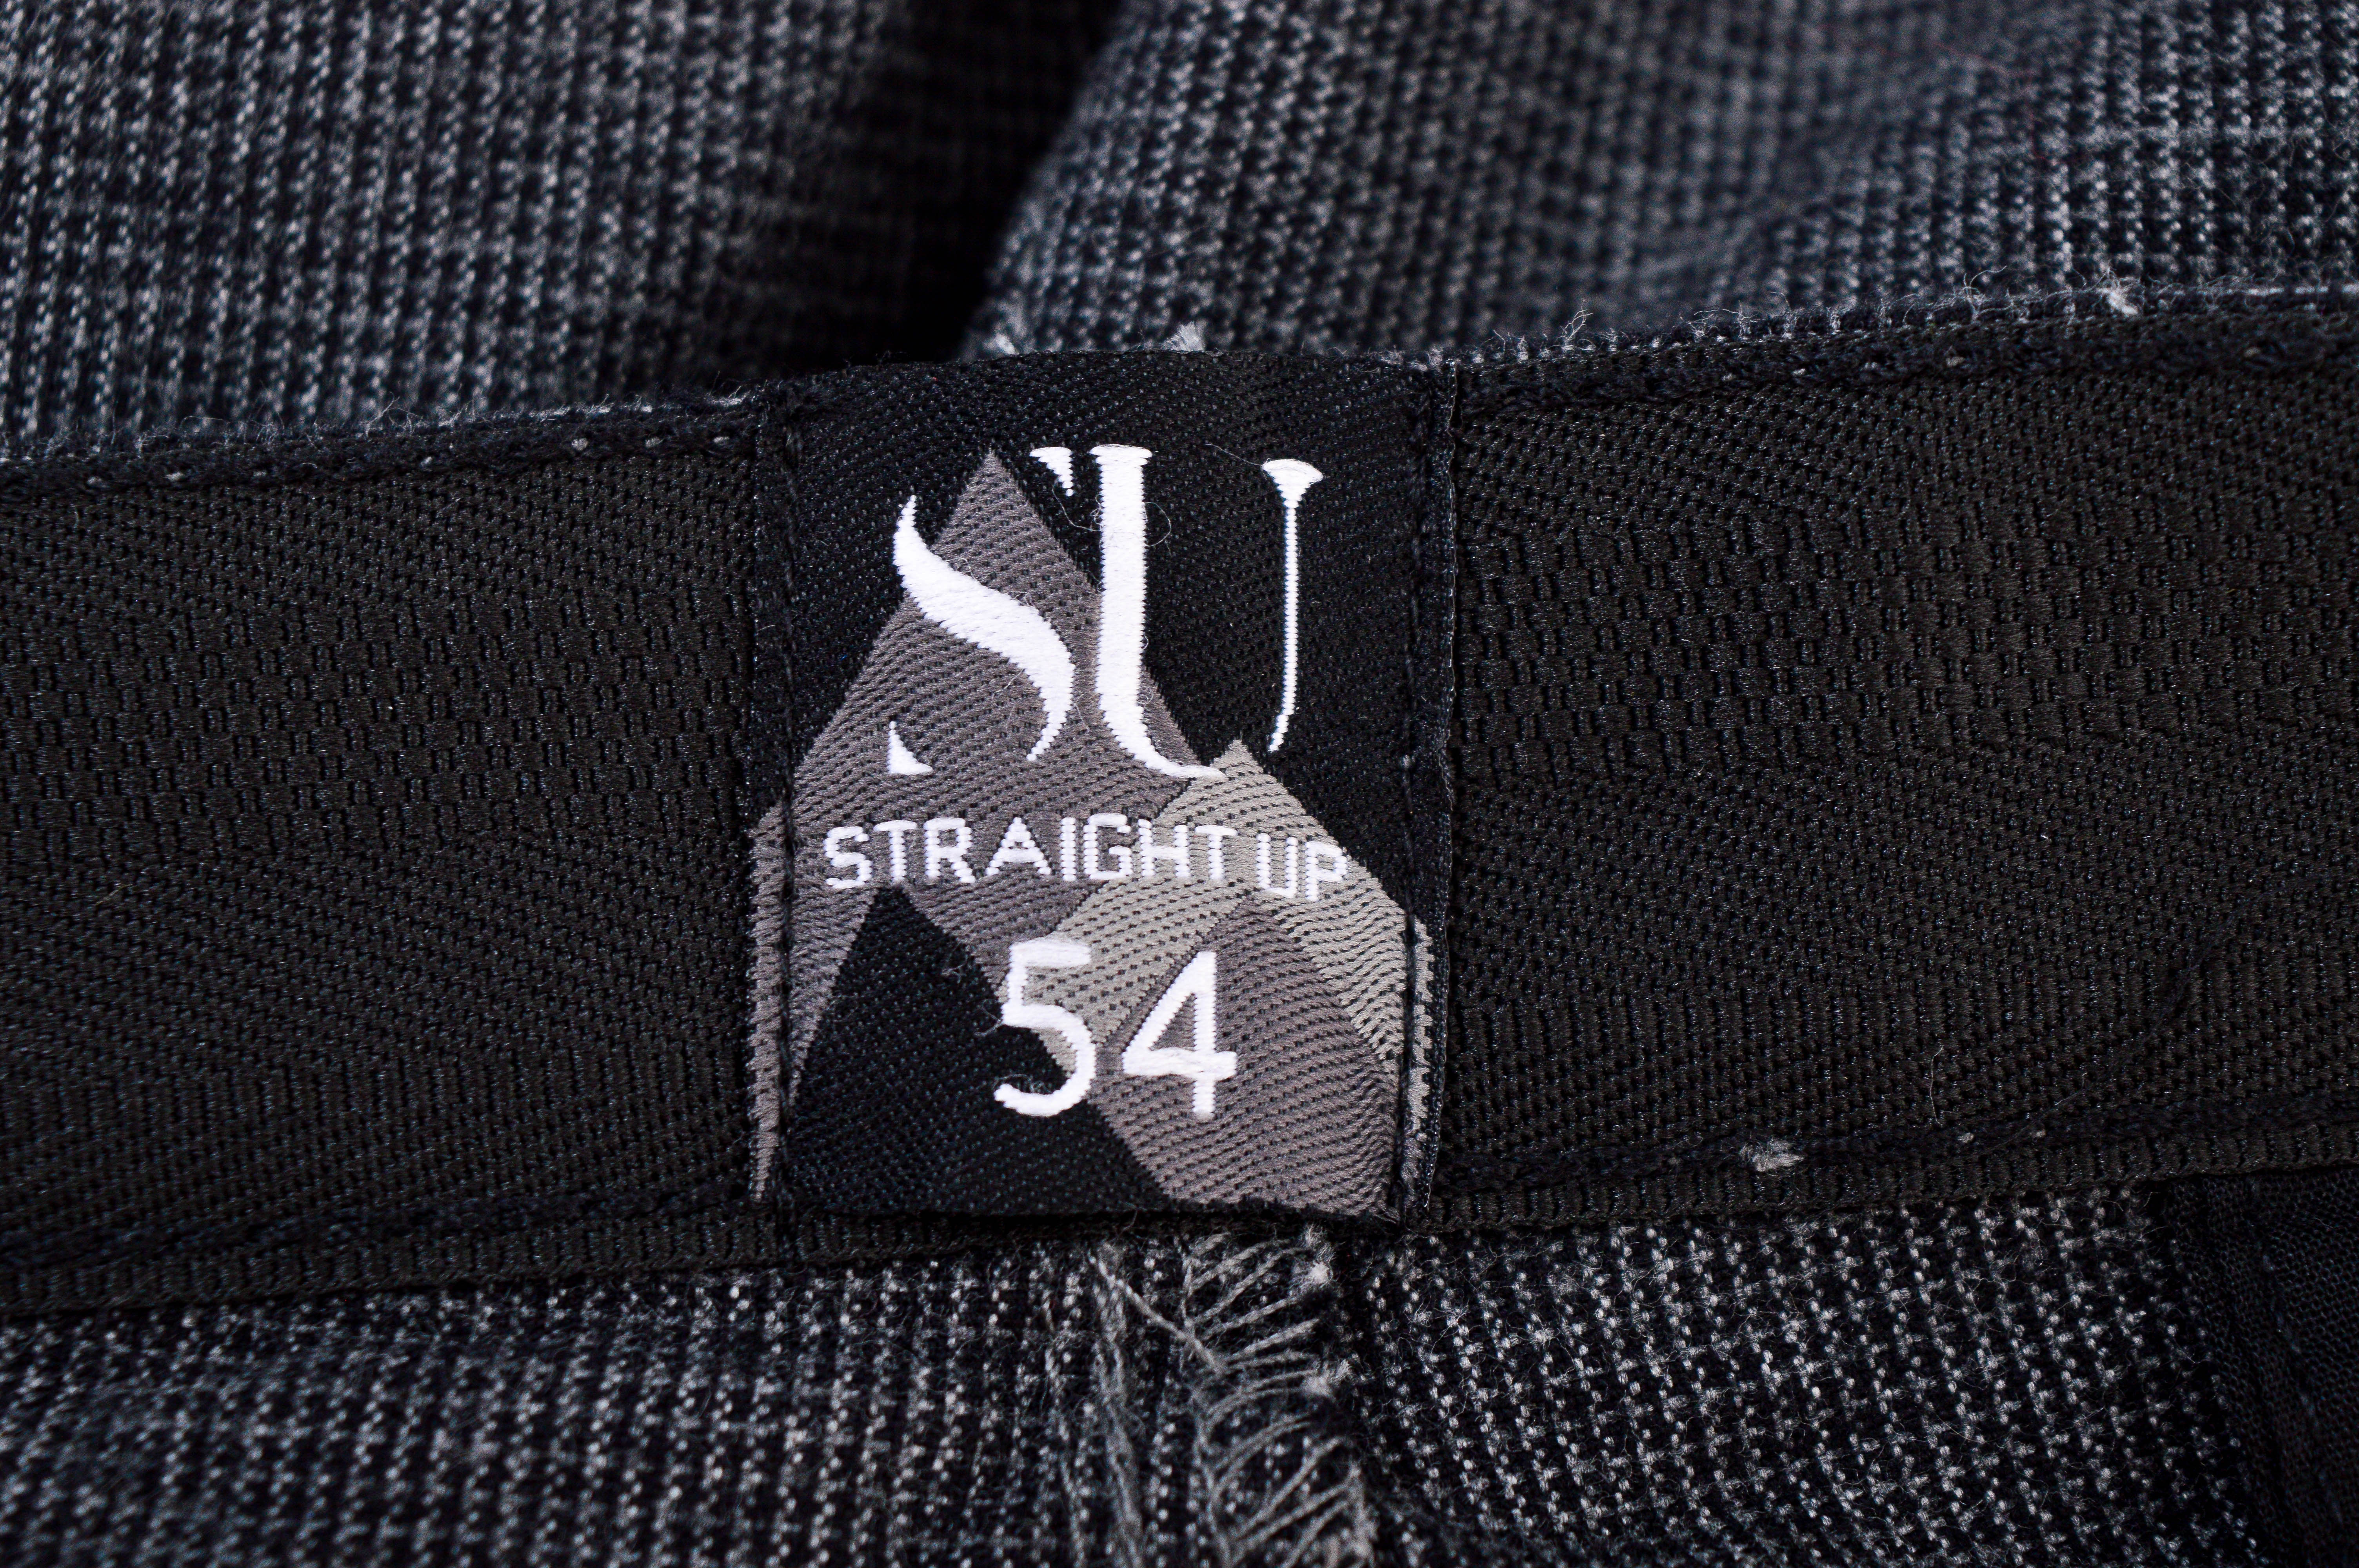 Men's trousers - Straight Up - 2